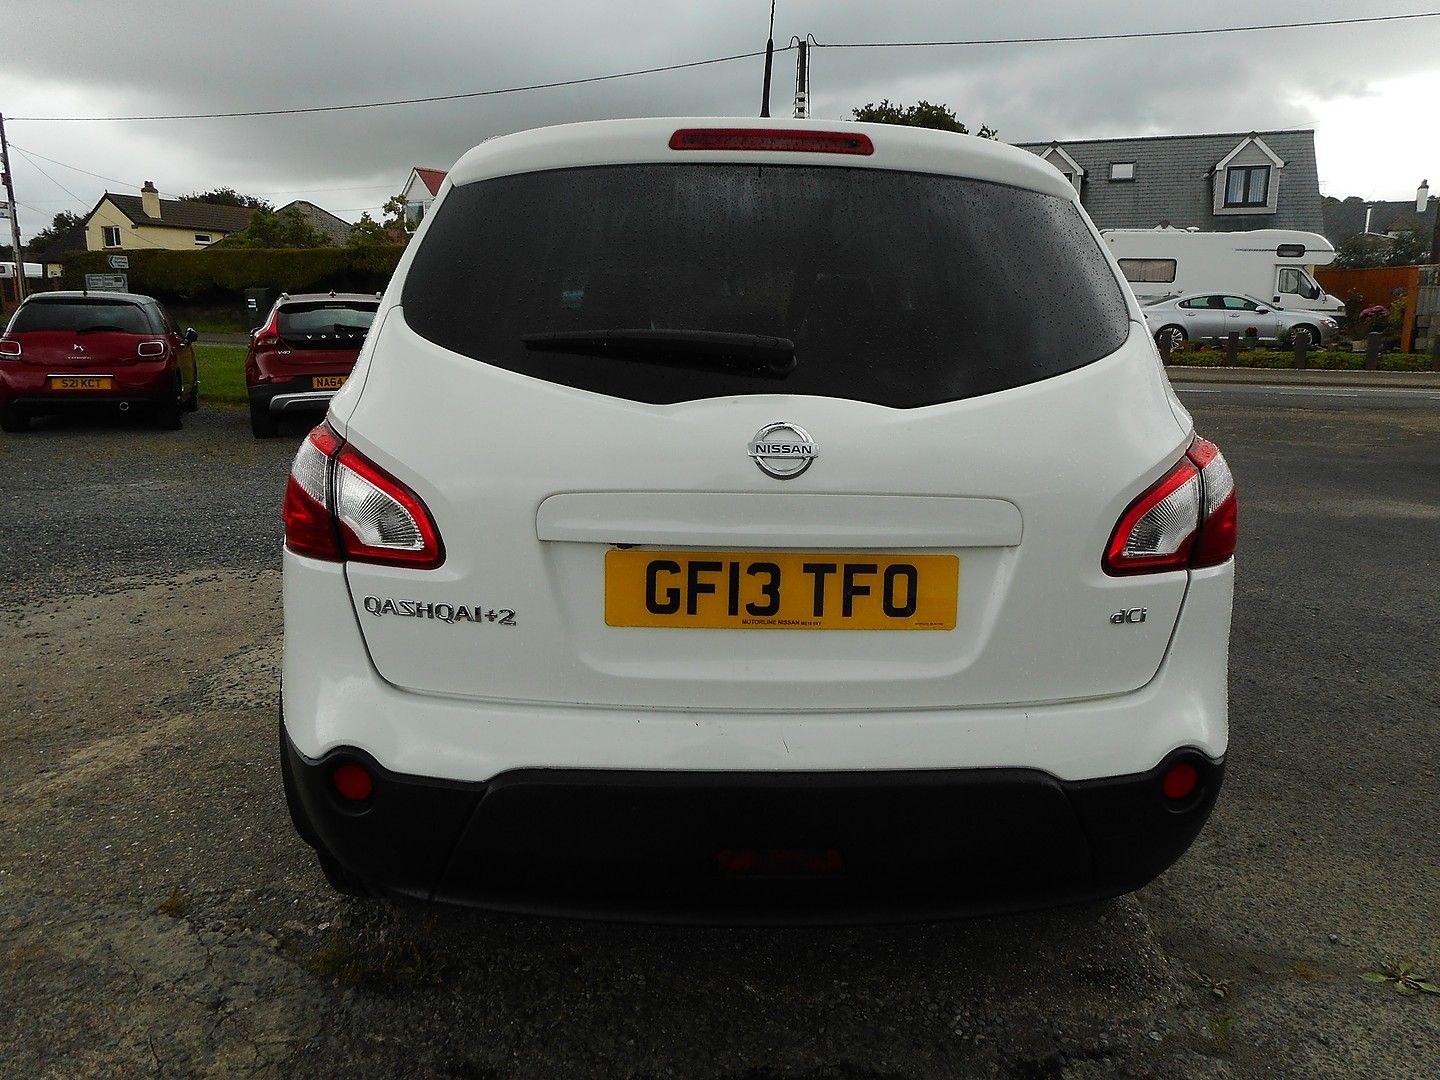 NISSAN QASHQAI 360 1.5 dCi 7 SEATER (2013) - Picture 16